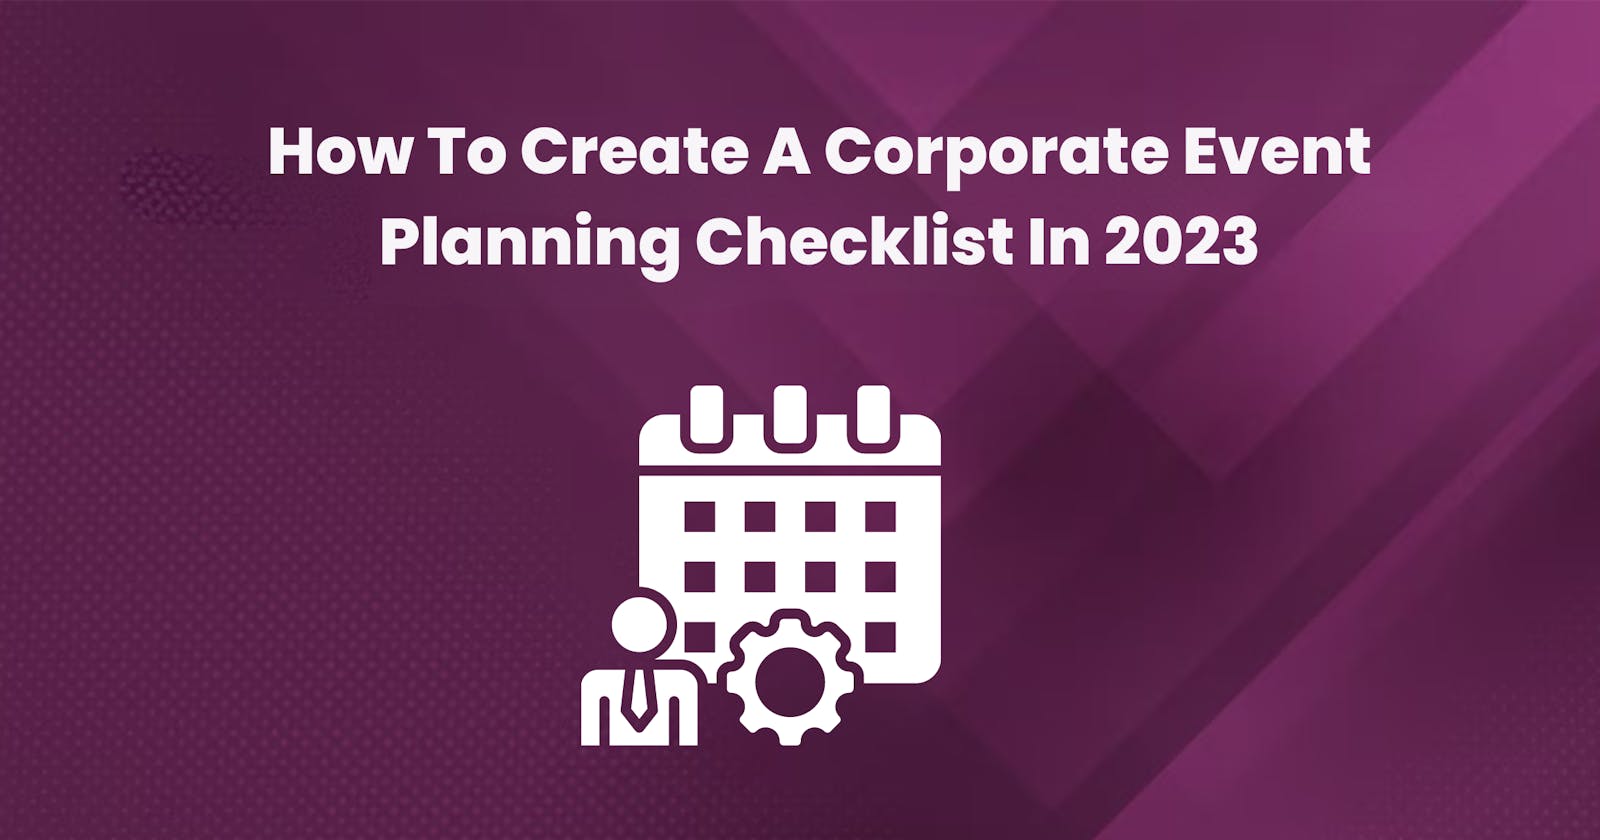 How To Create A Corporate Event Planning Checklist In 2023